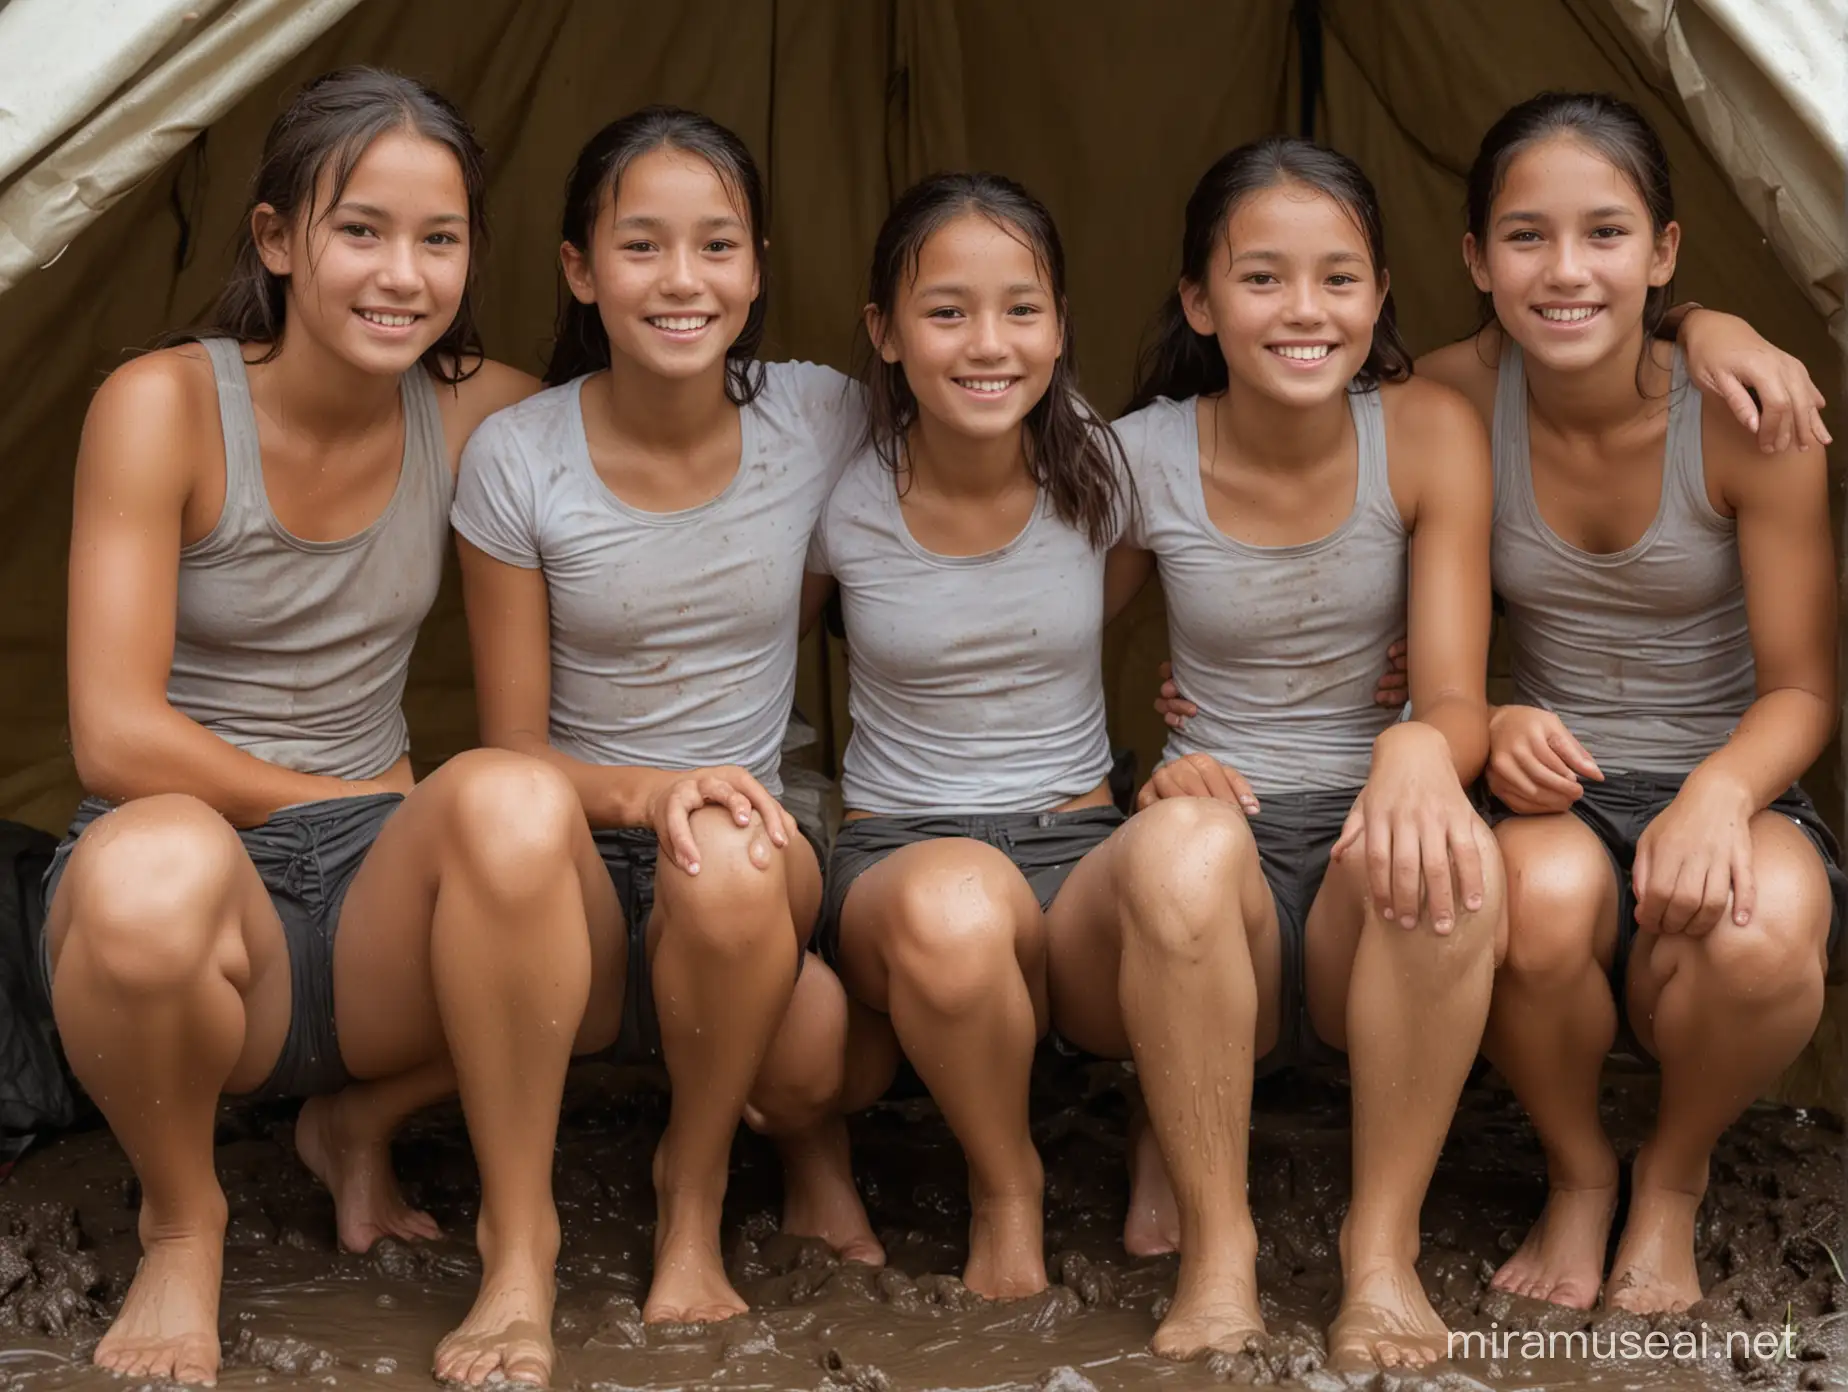 Exhausted Young Girls Huddled Together in RainSoaked Camping Tent